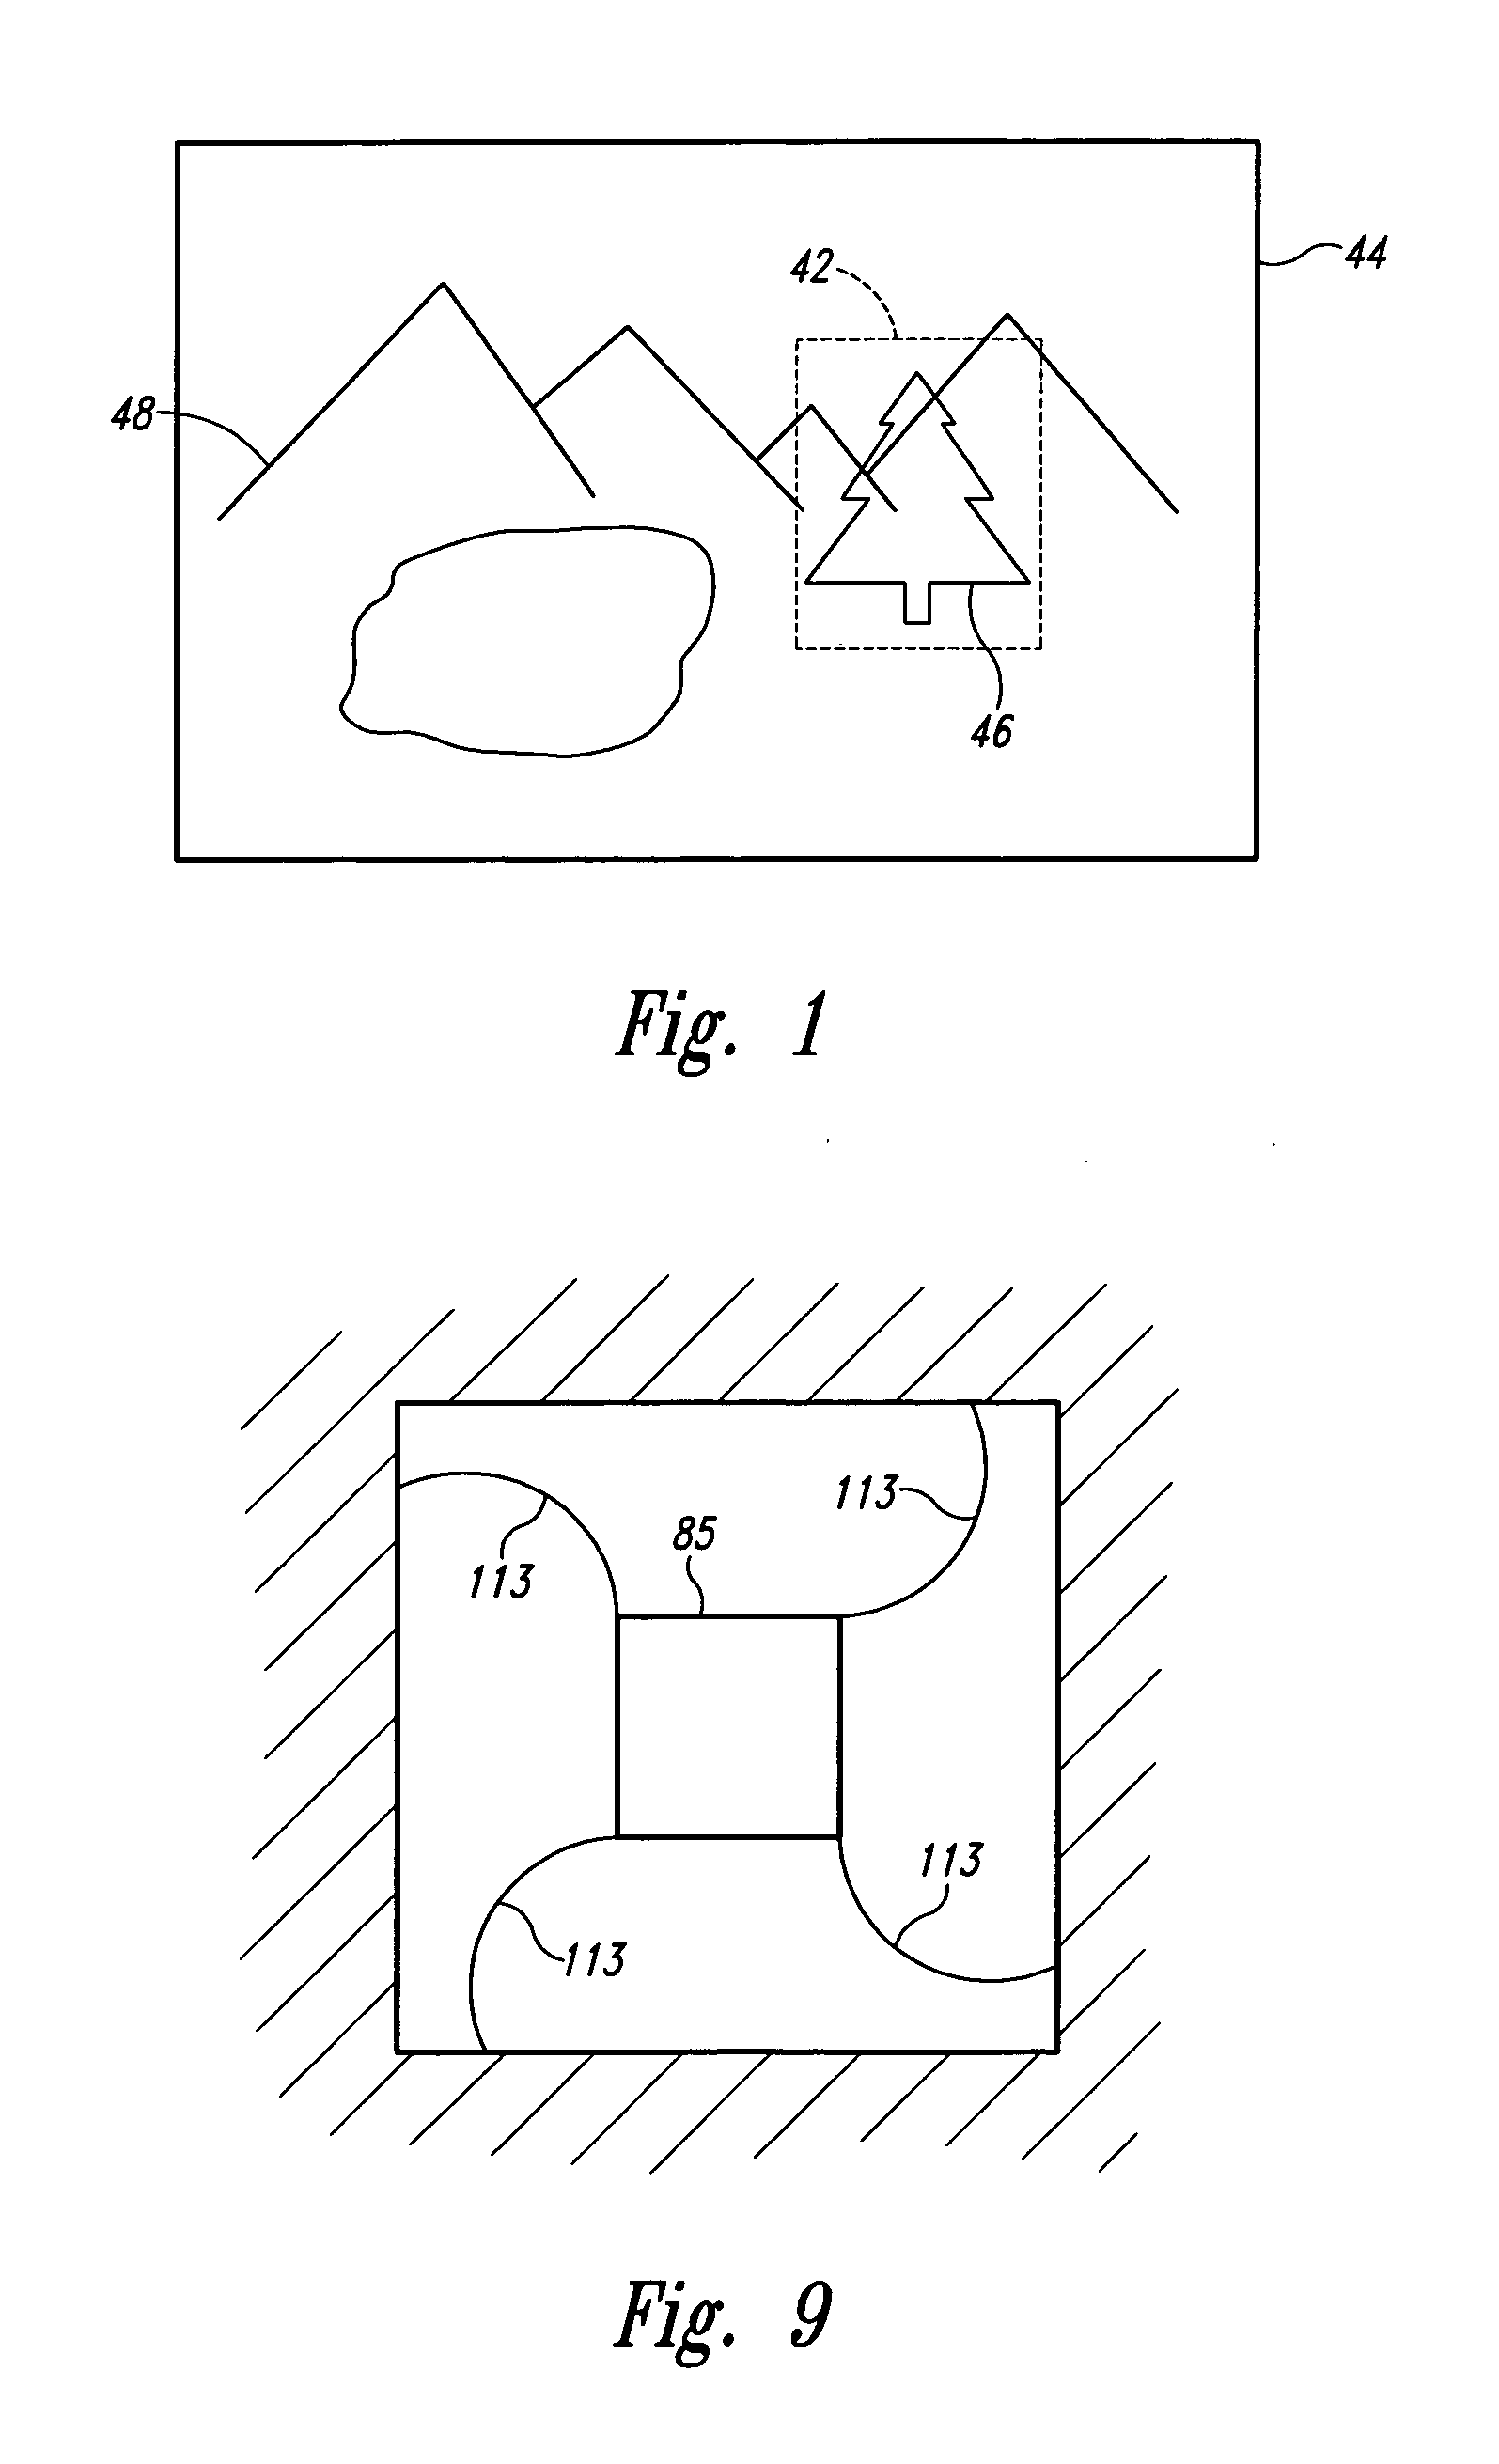 Apparatus for remotely imaging a region